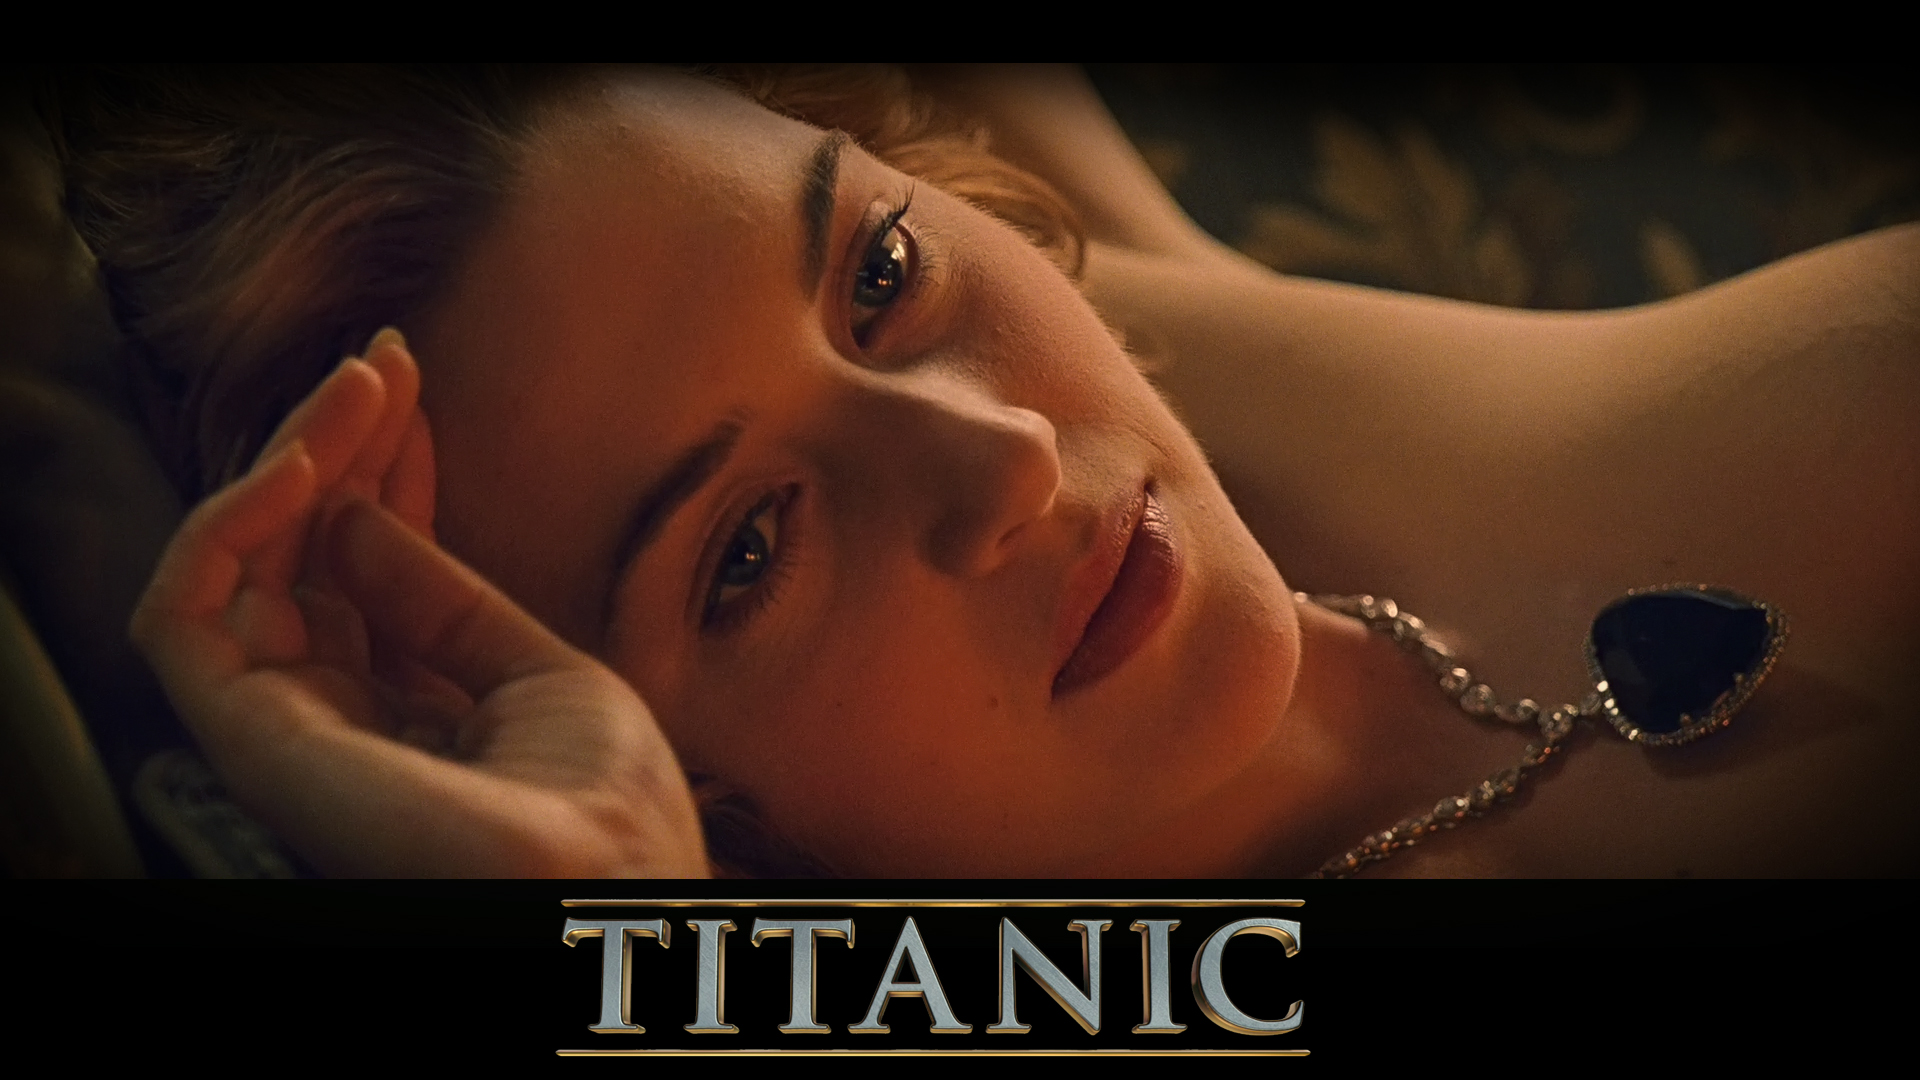 Kate Winslet in Titanic Wallpapers HD Wallpapers 1920x1080